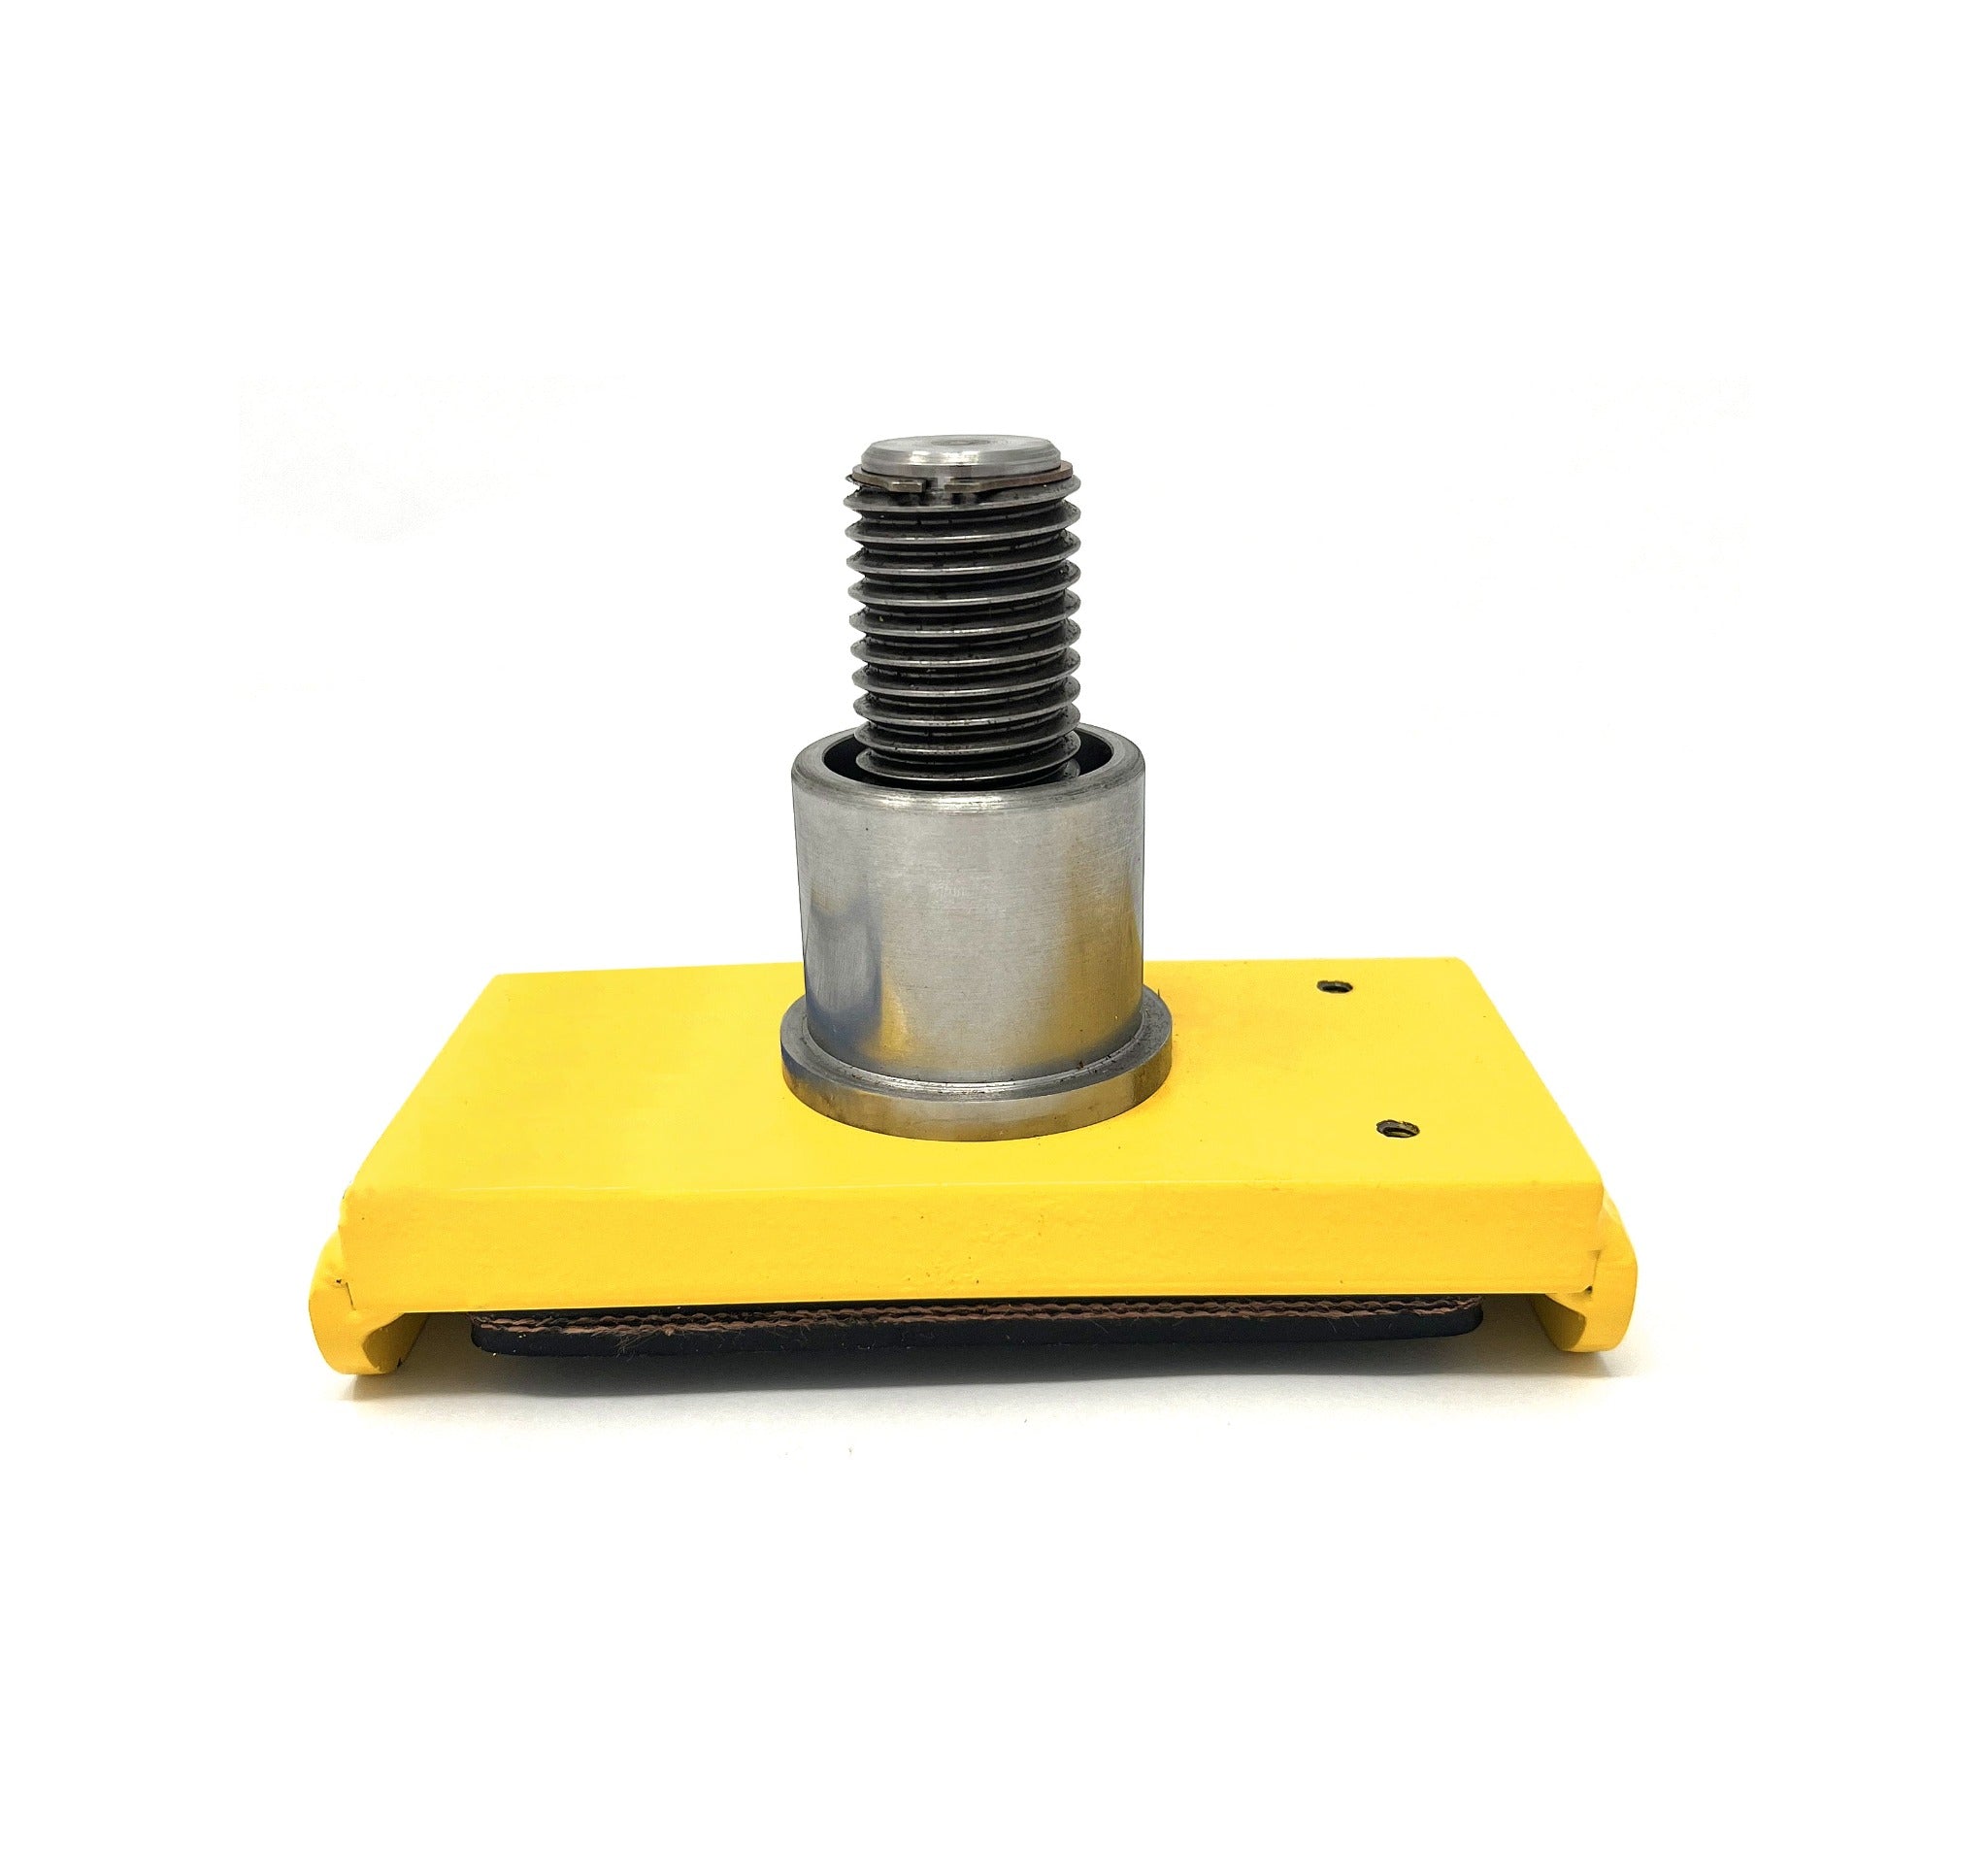 Challanger Lift Rubber Pad Adapter Base For GM Trucks